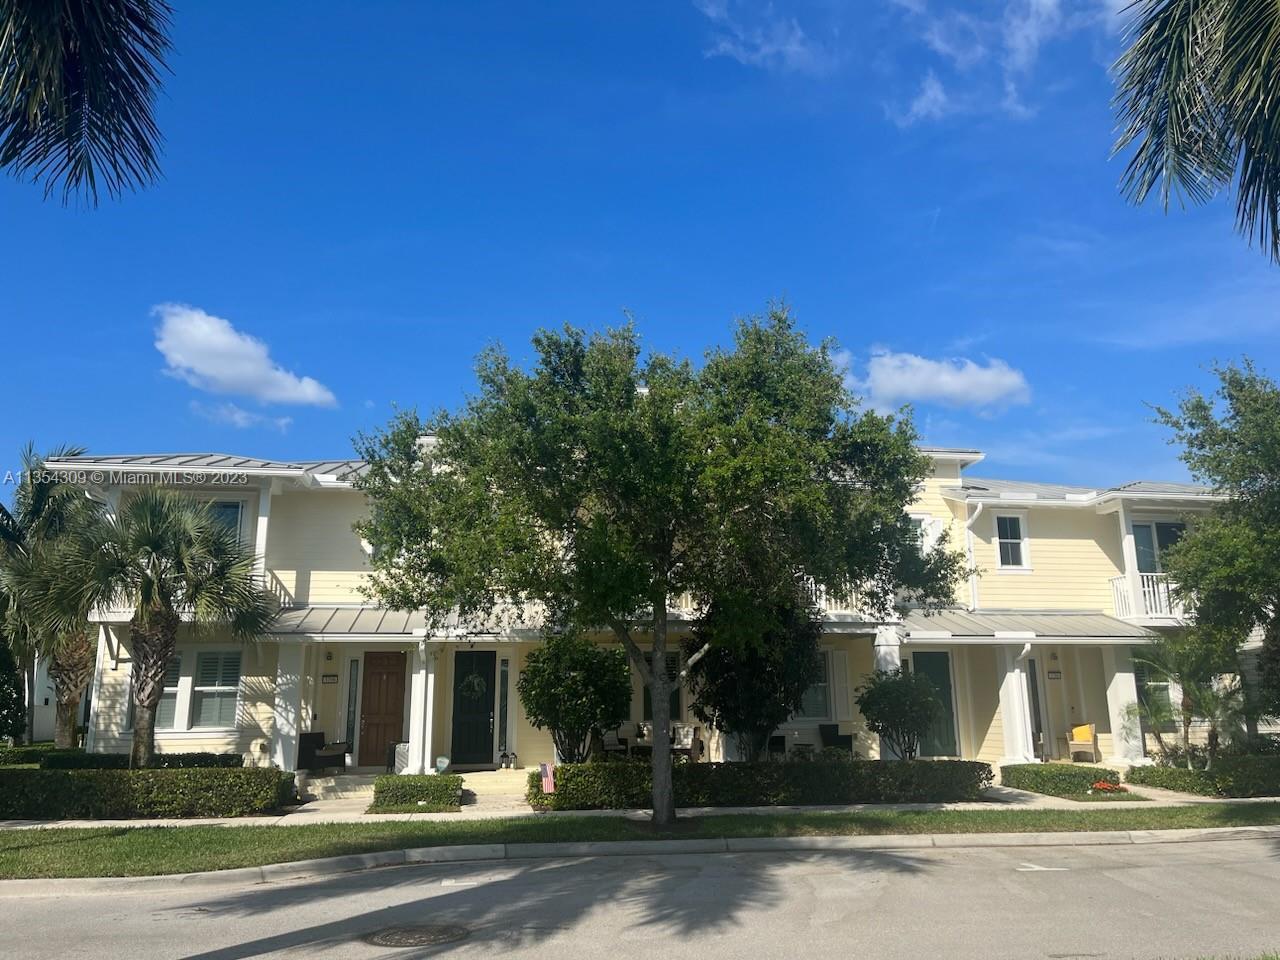 Key-West Style Townhome in the lovely community of Mallory Creek at Abacoa. This 3 bedroom, 2 and a 